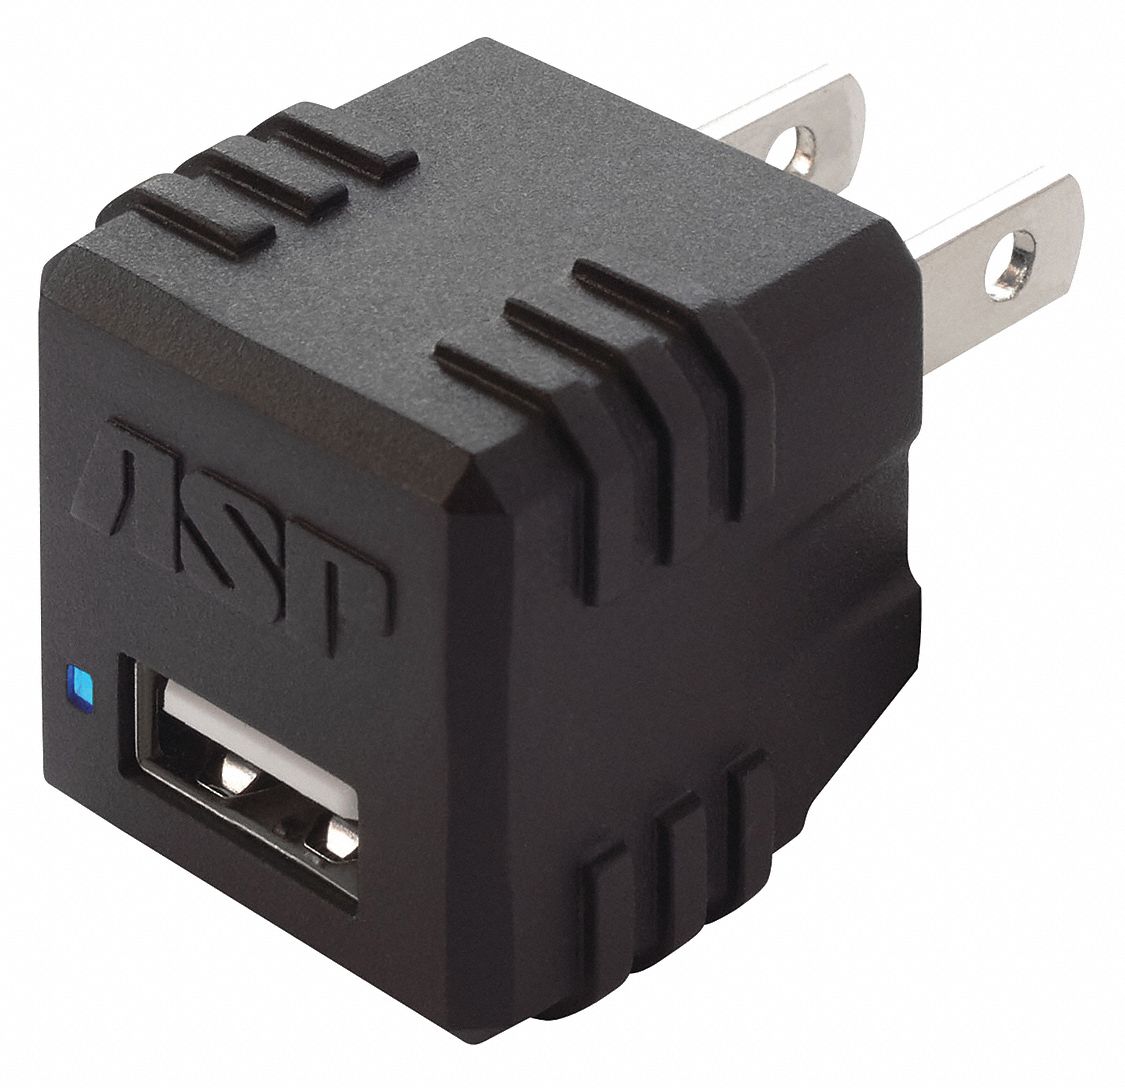 25VF17 - USB Wall Outlet Charger 120VAC